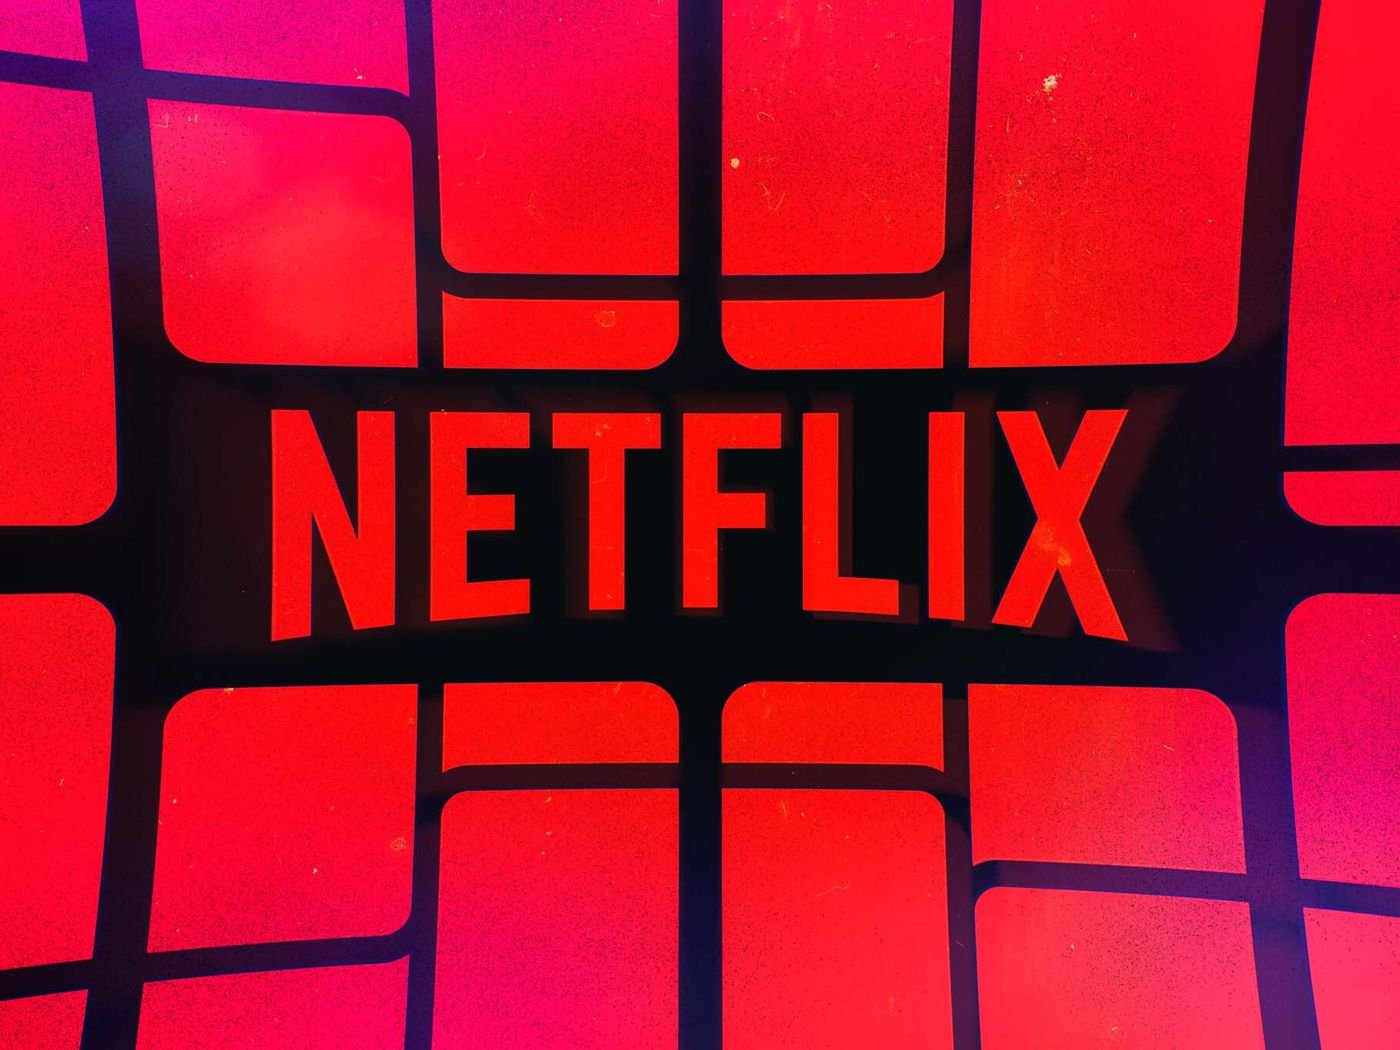 3 Reasons Why Netflix Will Lose 2 Million More Subscribers